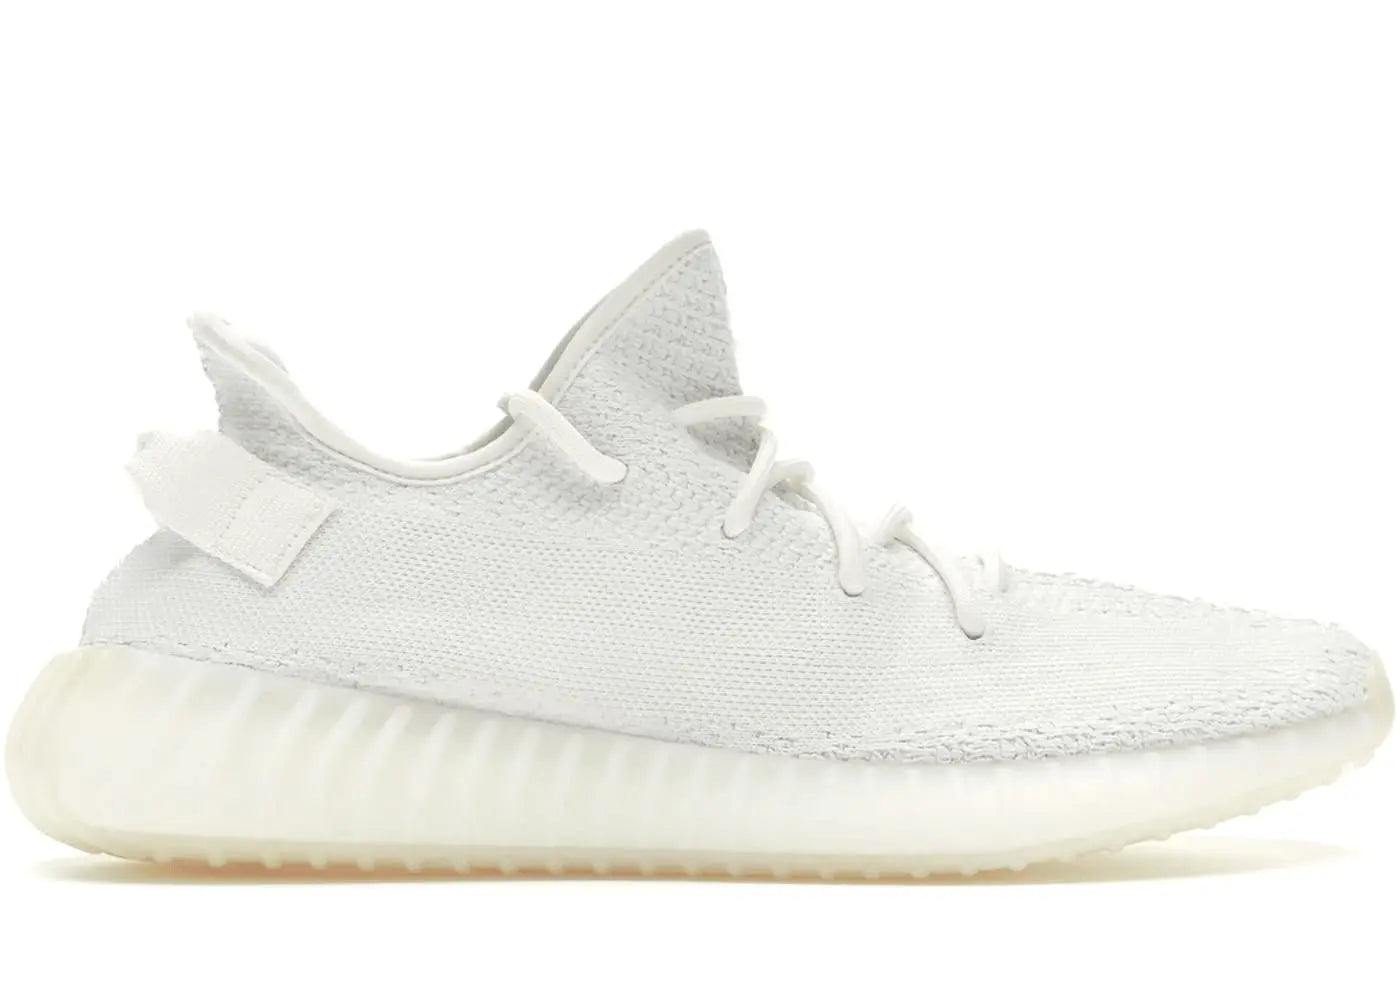 adidas Yeezy Boost 350 V2 Cream in Auckland, New Zealand - Shop name